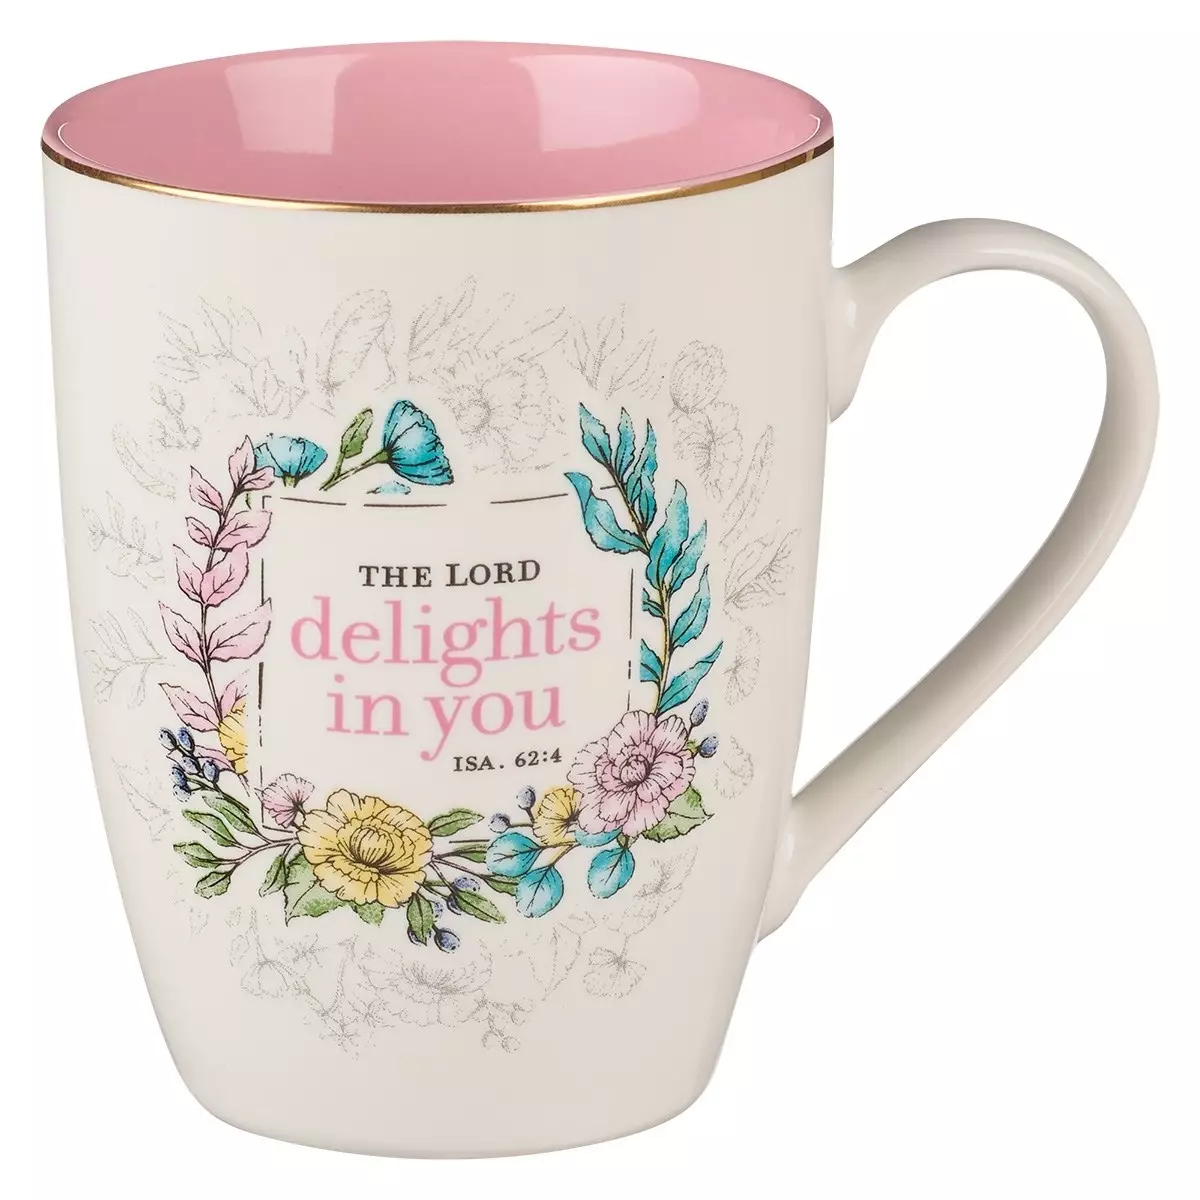 Mug Pink/White Floral The Lord Delights in You Isa. 62:4